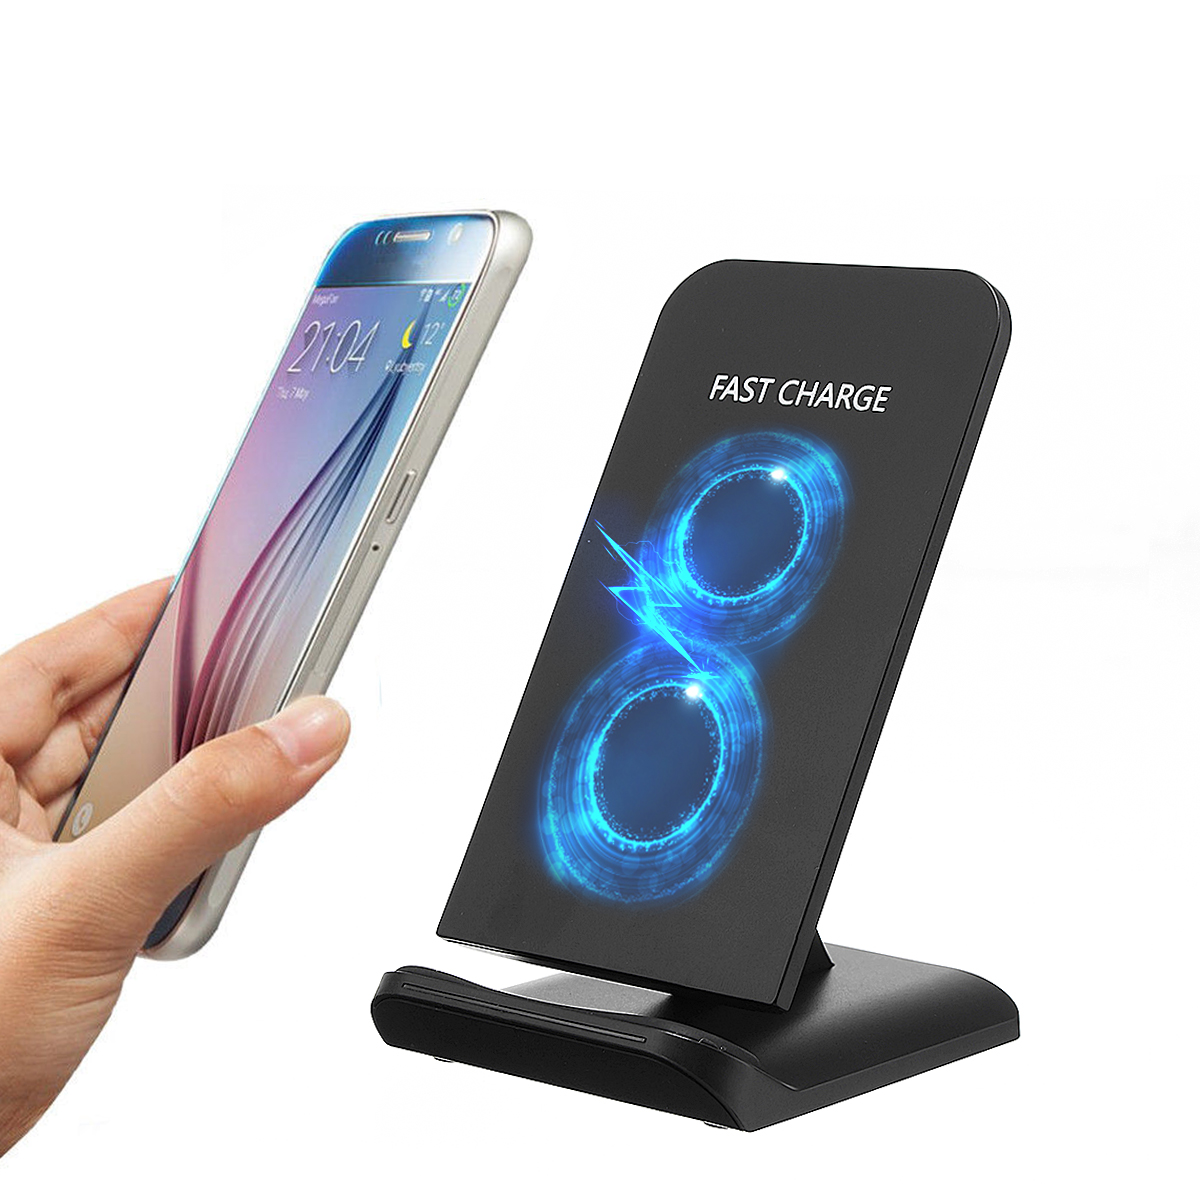 

M520 10W 2 Coils Qi Wireless Quick Charger Stand Holder for Samsung S8 Galaxy Note 8 iPhone 8 Plus X